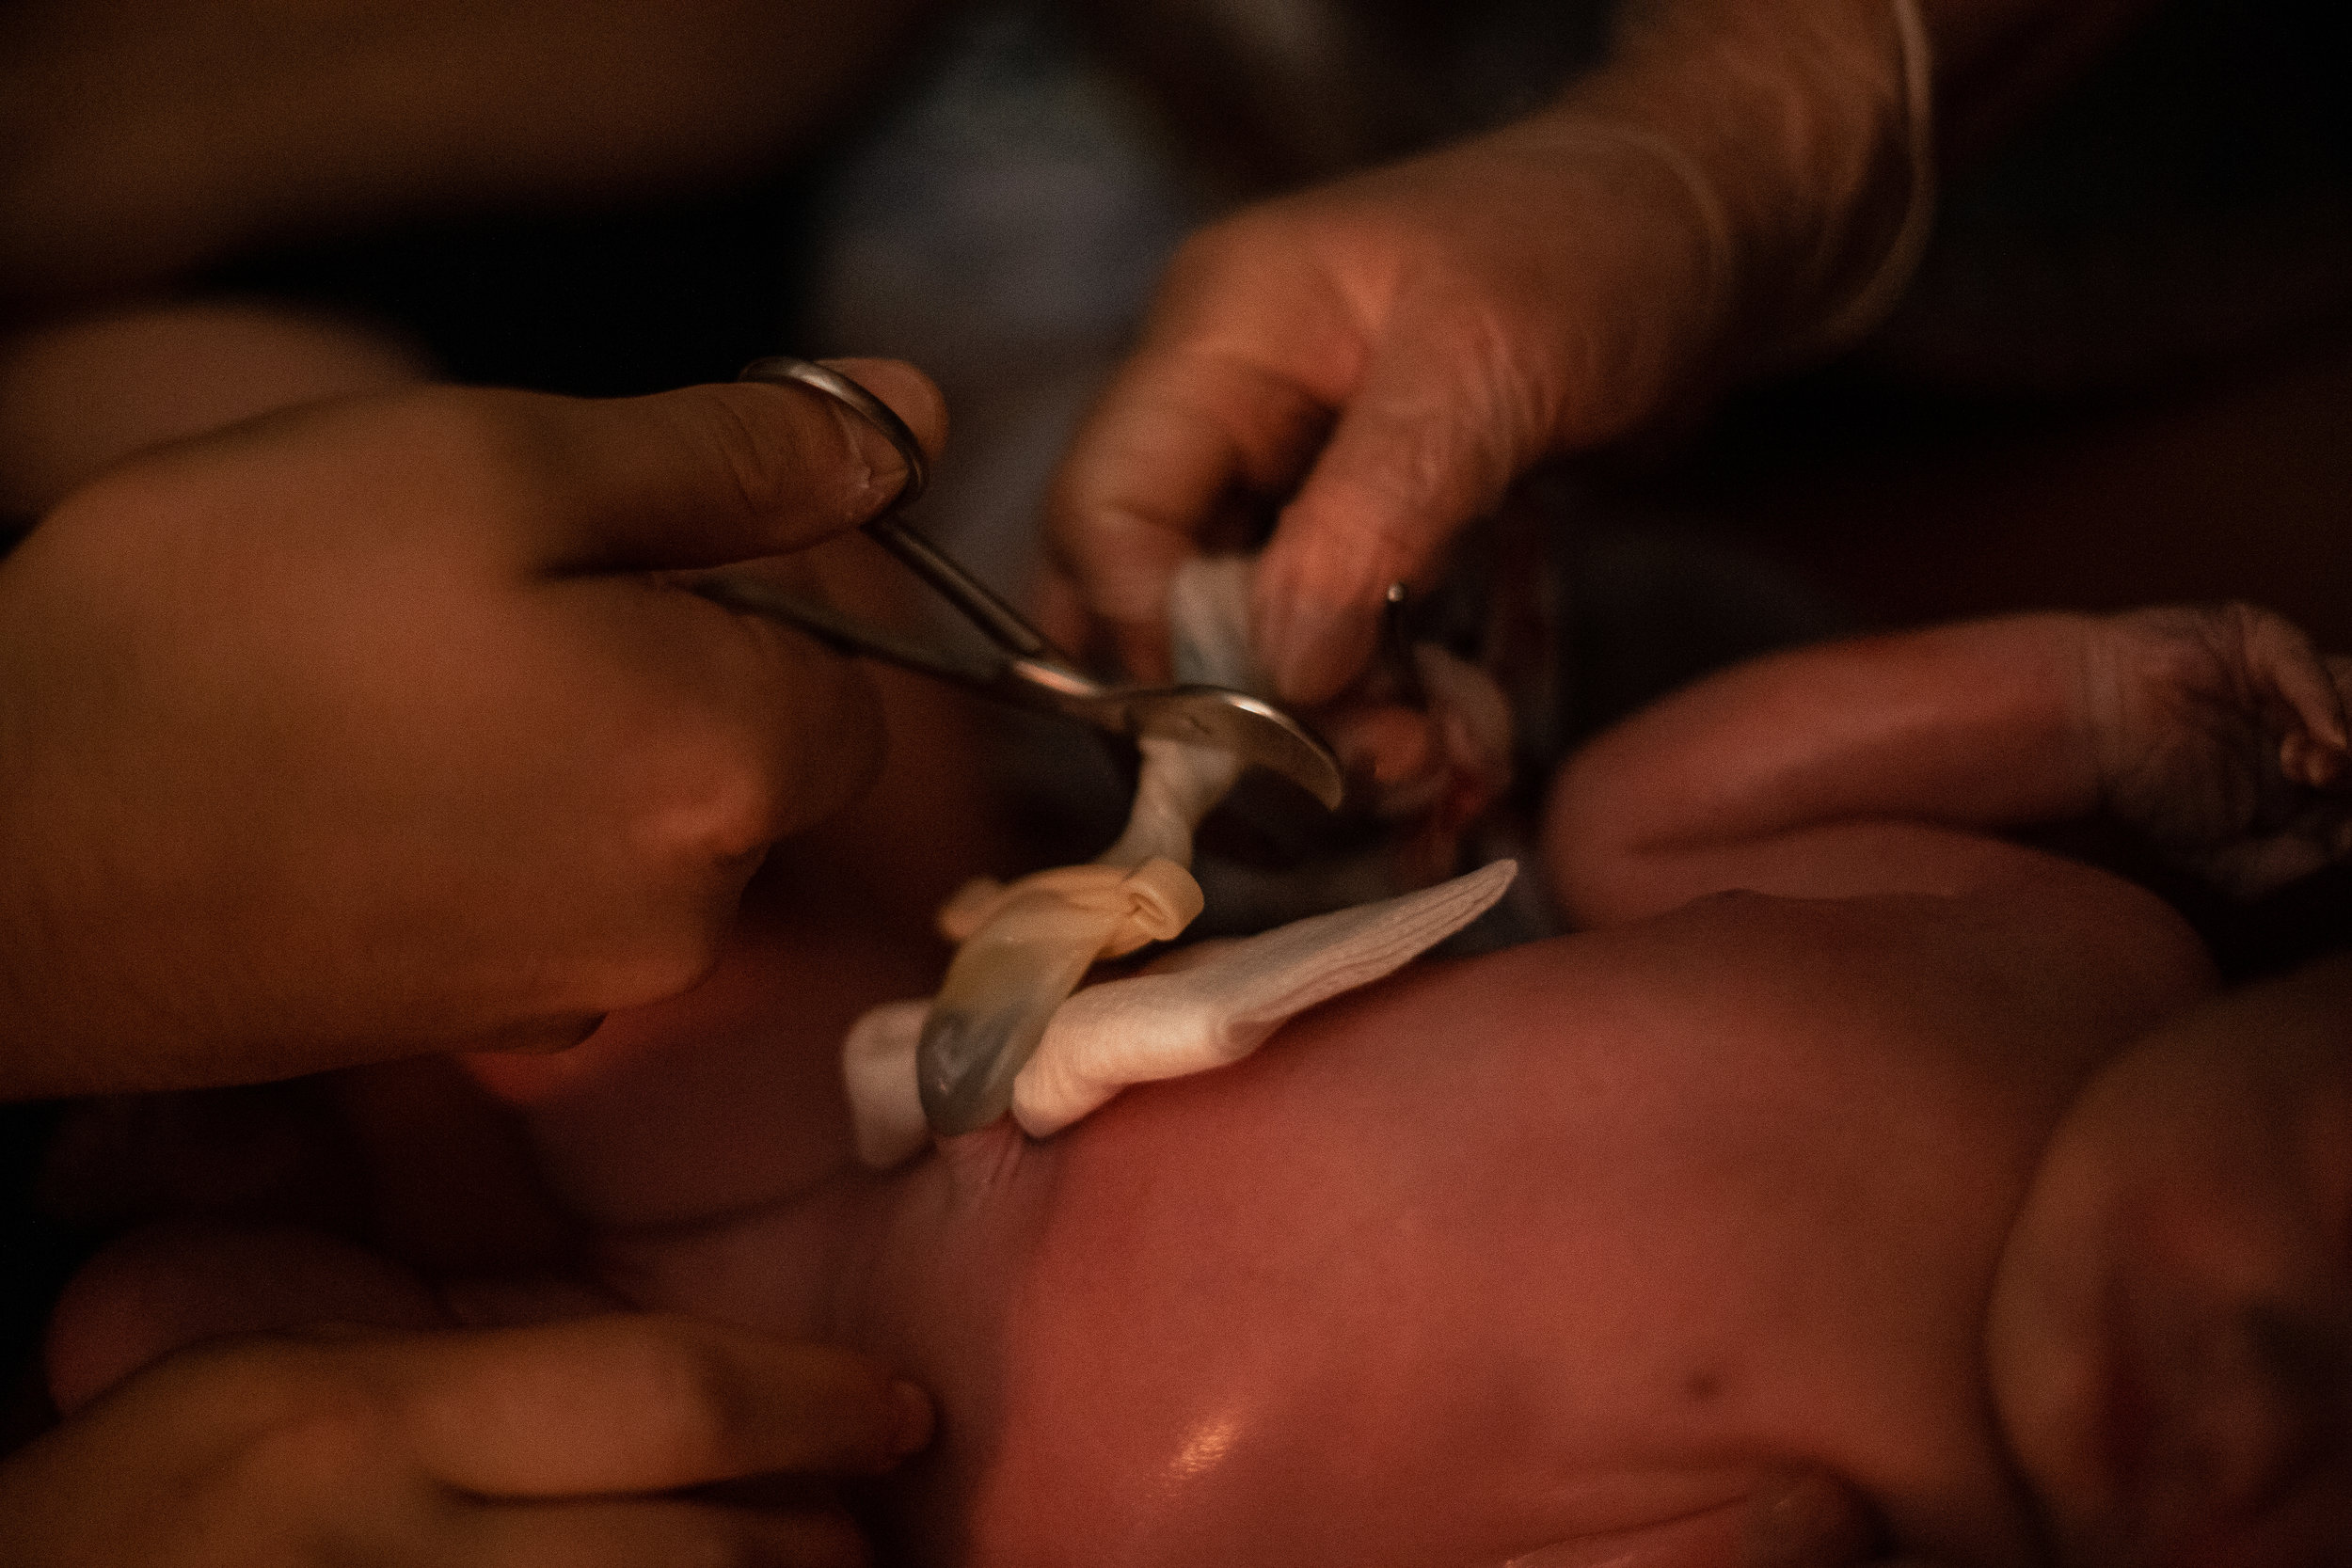 Midwife cutting umbilical cord in labor tub. 